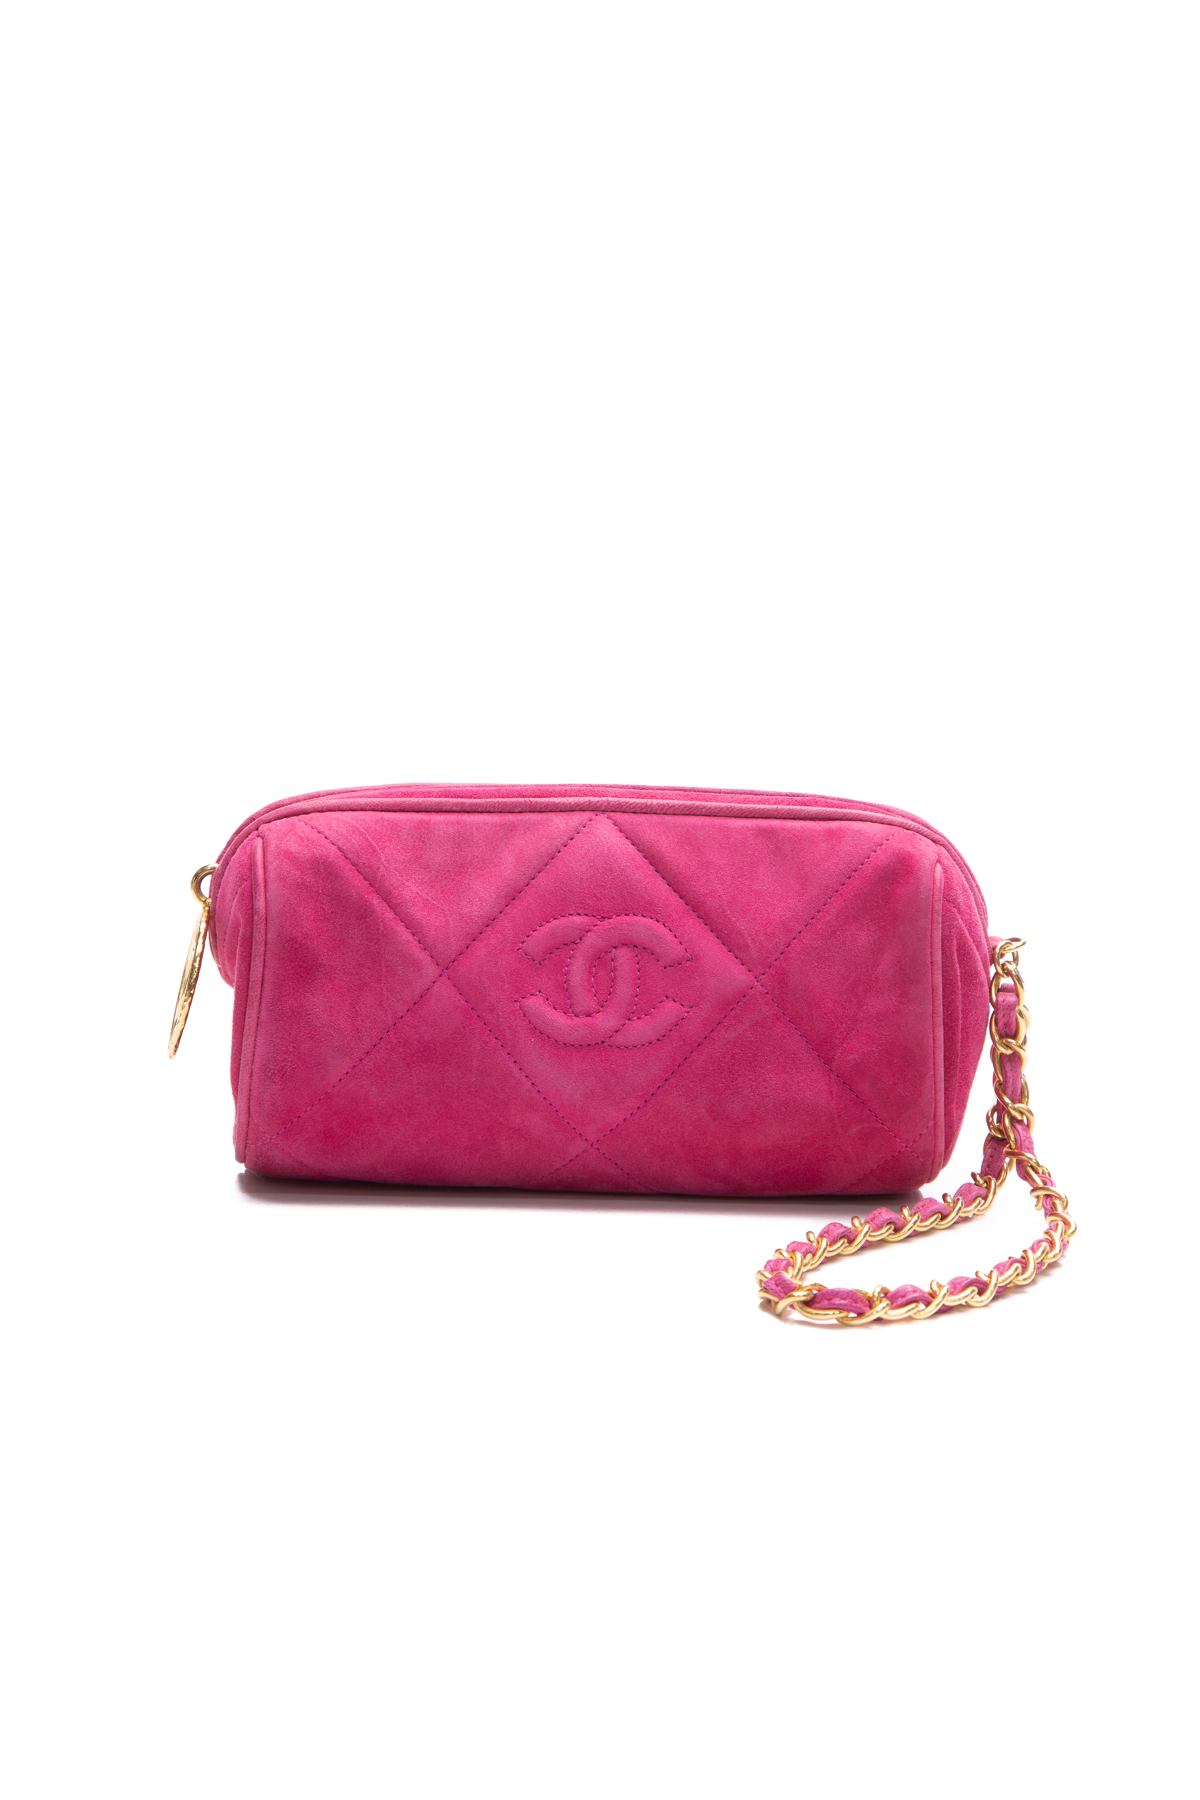 Chanel Suede Red Bag